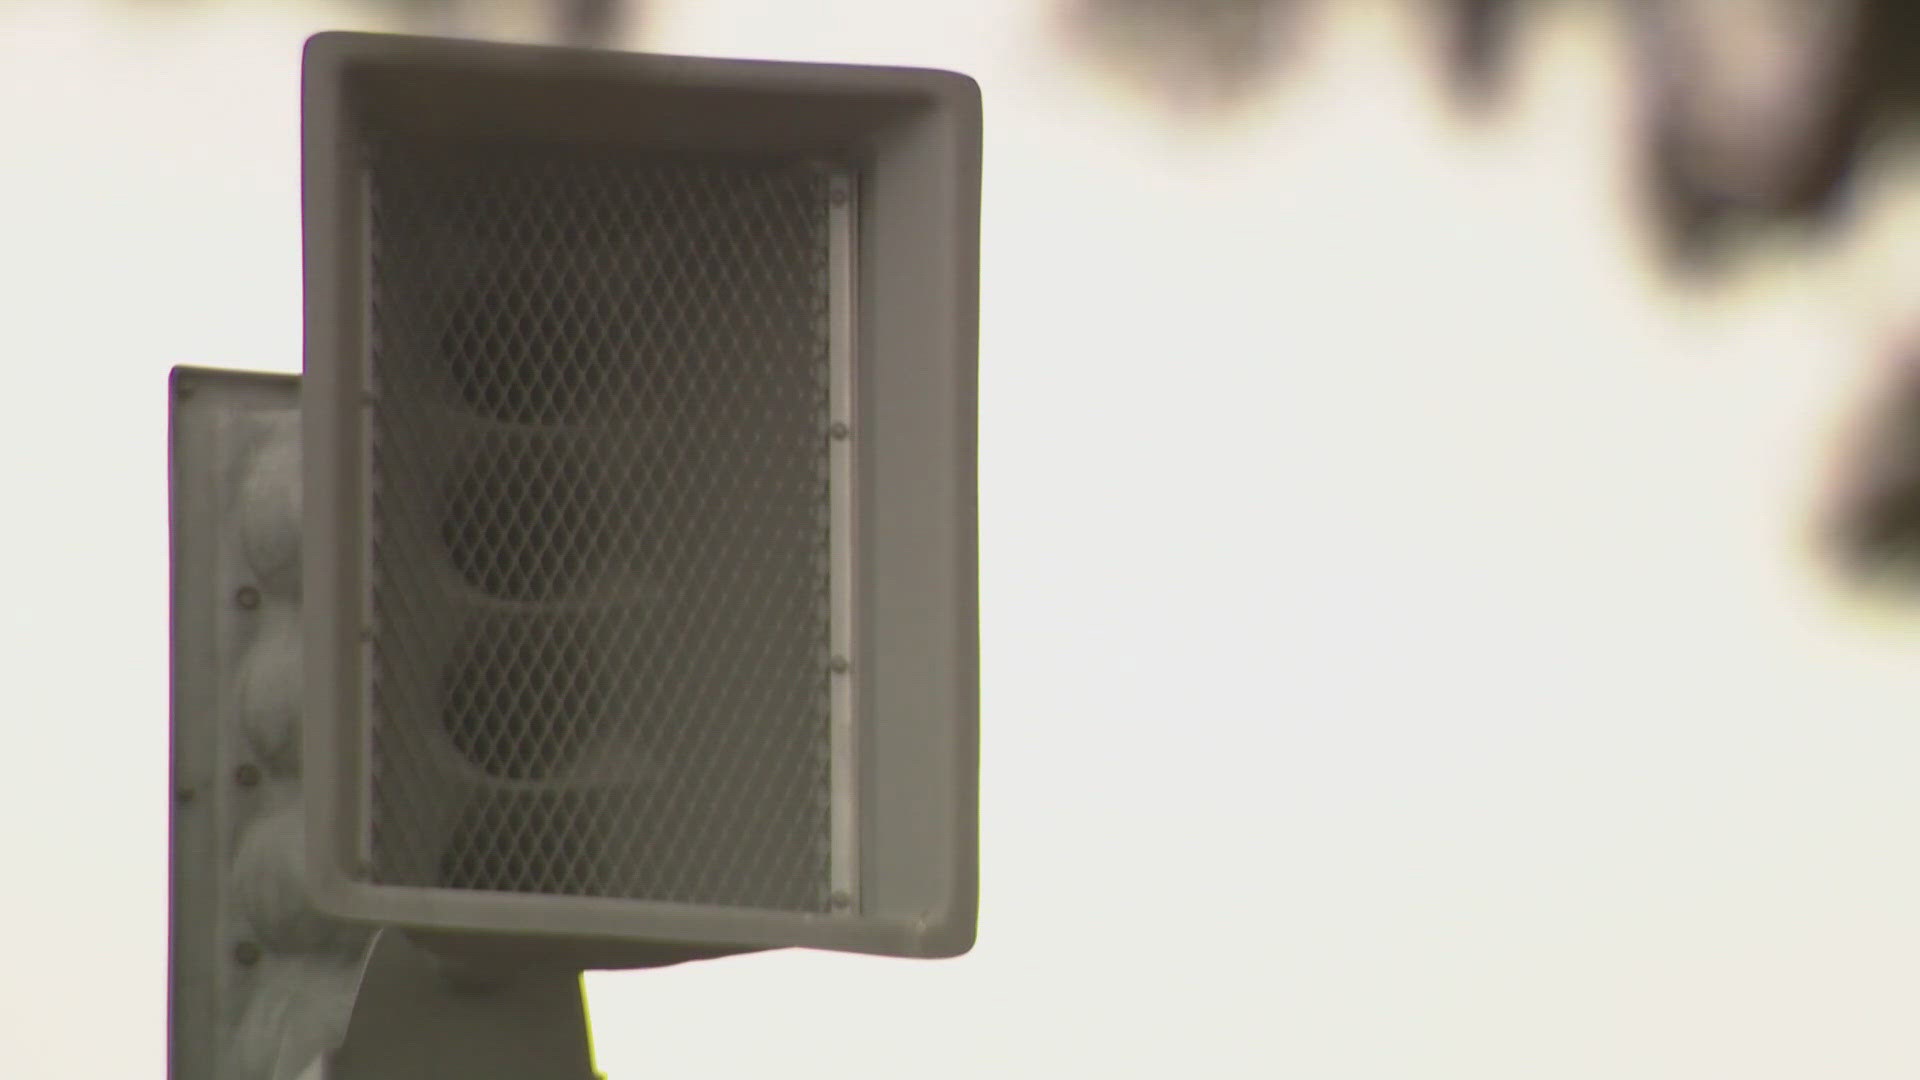 The Denver Office of Emergency Management plans to test outdoor warning sirens around Denver at 11 a.m. Wednesday.